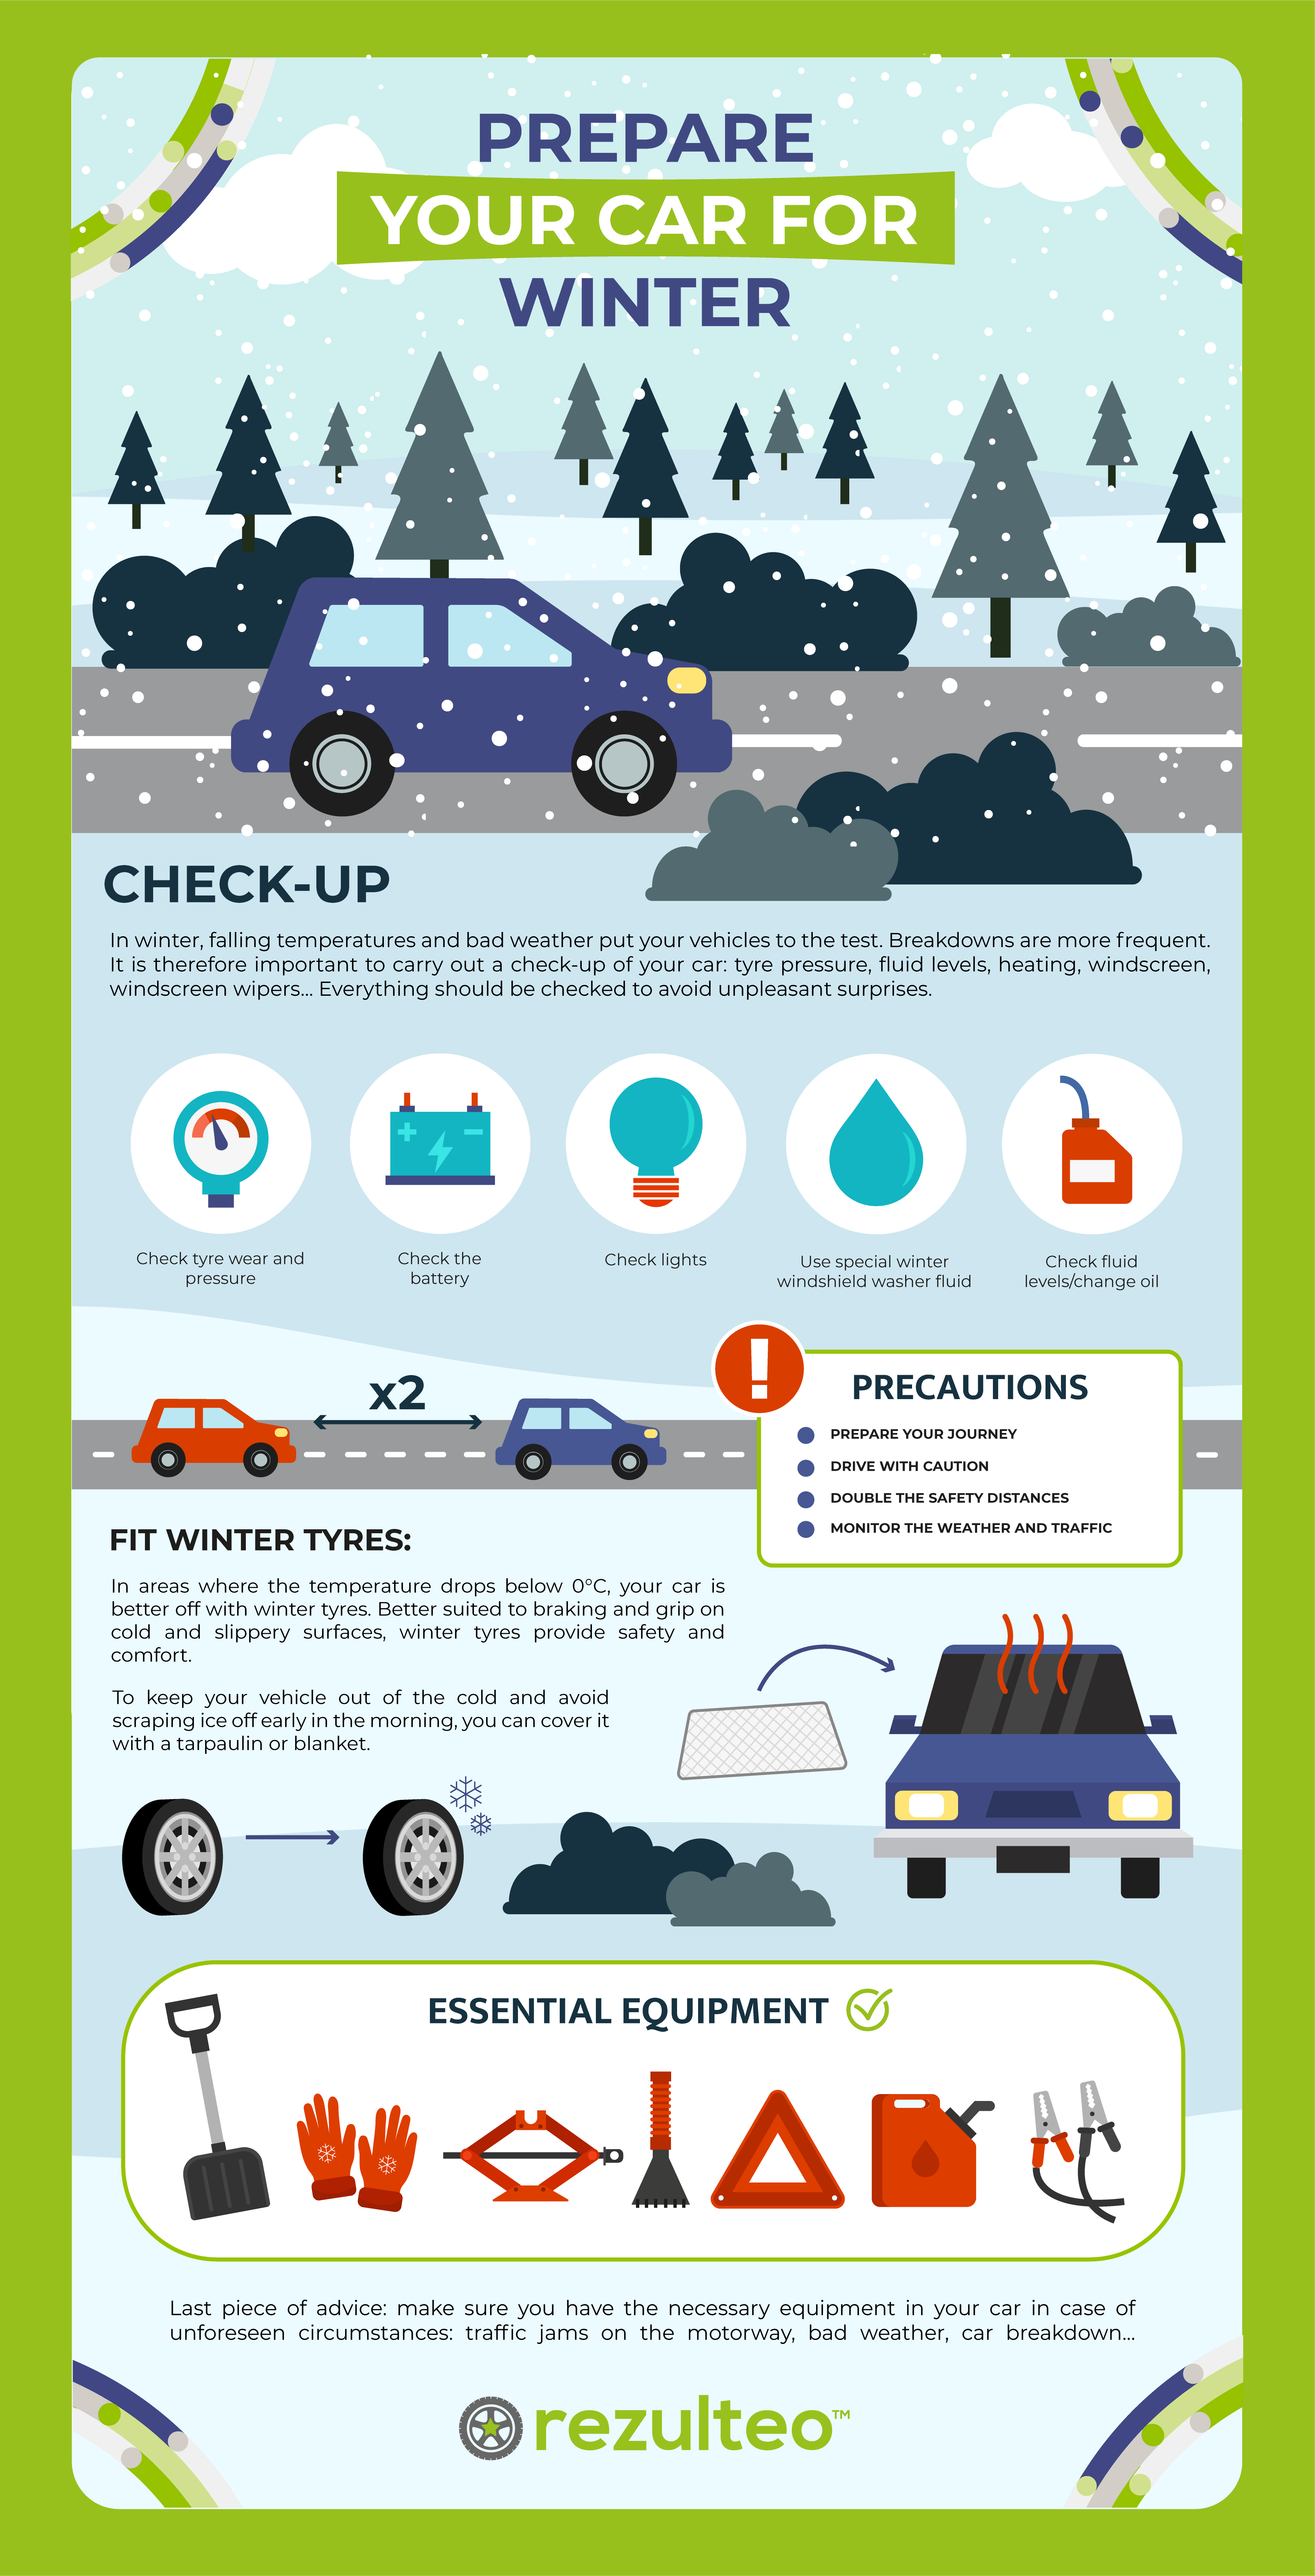 12 tips to prepare your car for winter - rezulteo